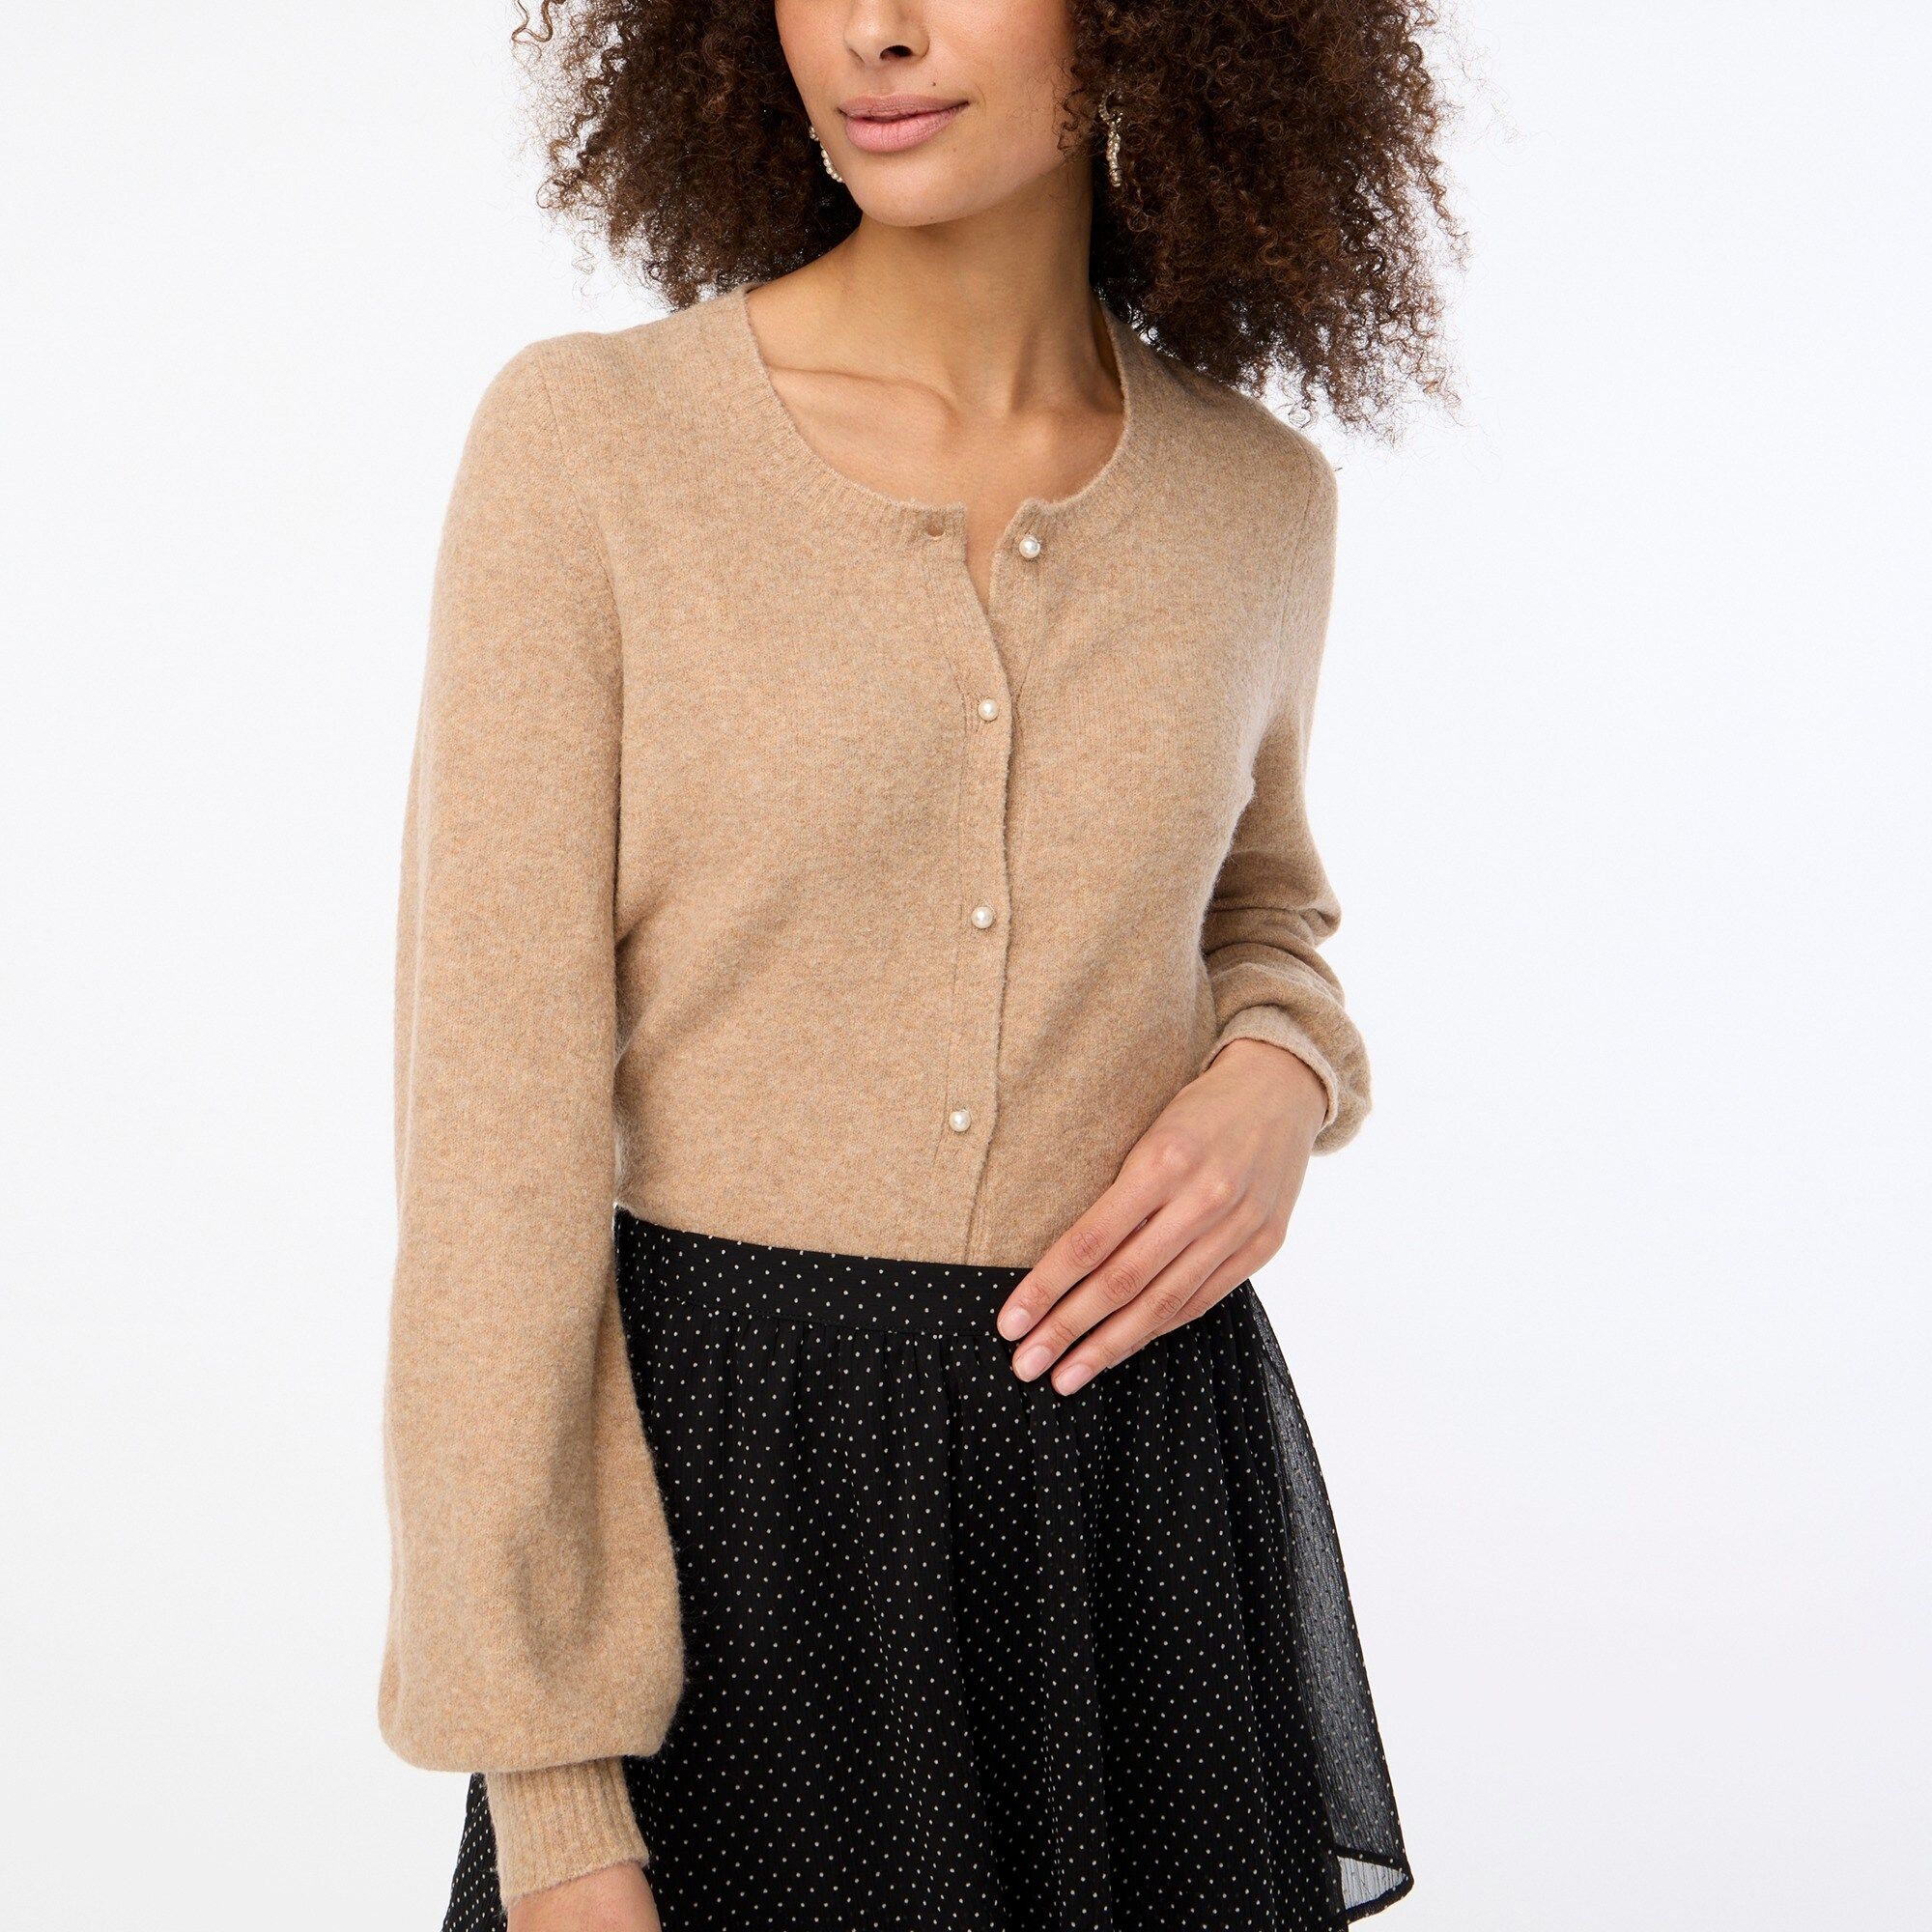 newPuff-sleeve cardigan sweater in extra-soft yarnItem BL759Comparable value:$98.00Your price:$29... | J.Crew Factory